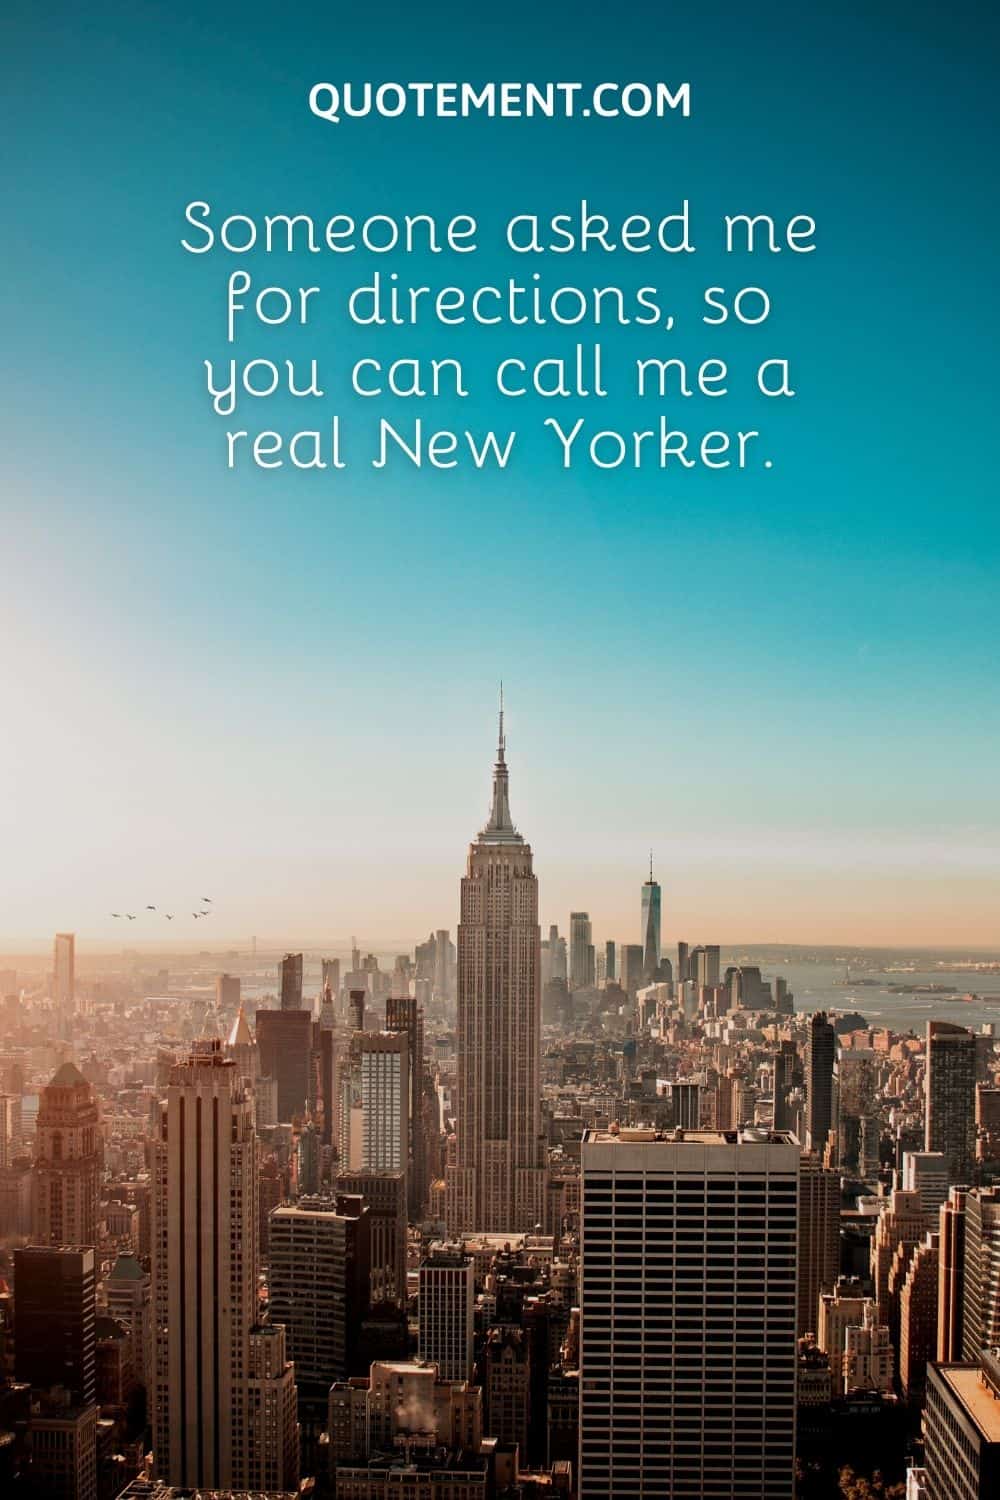 Someone asked me for directions, so you can call me a real New Yorker.